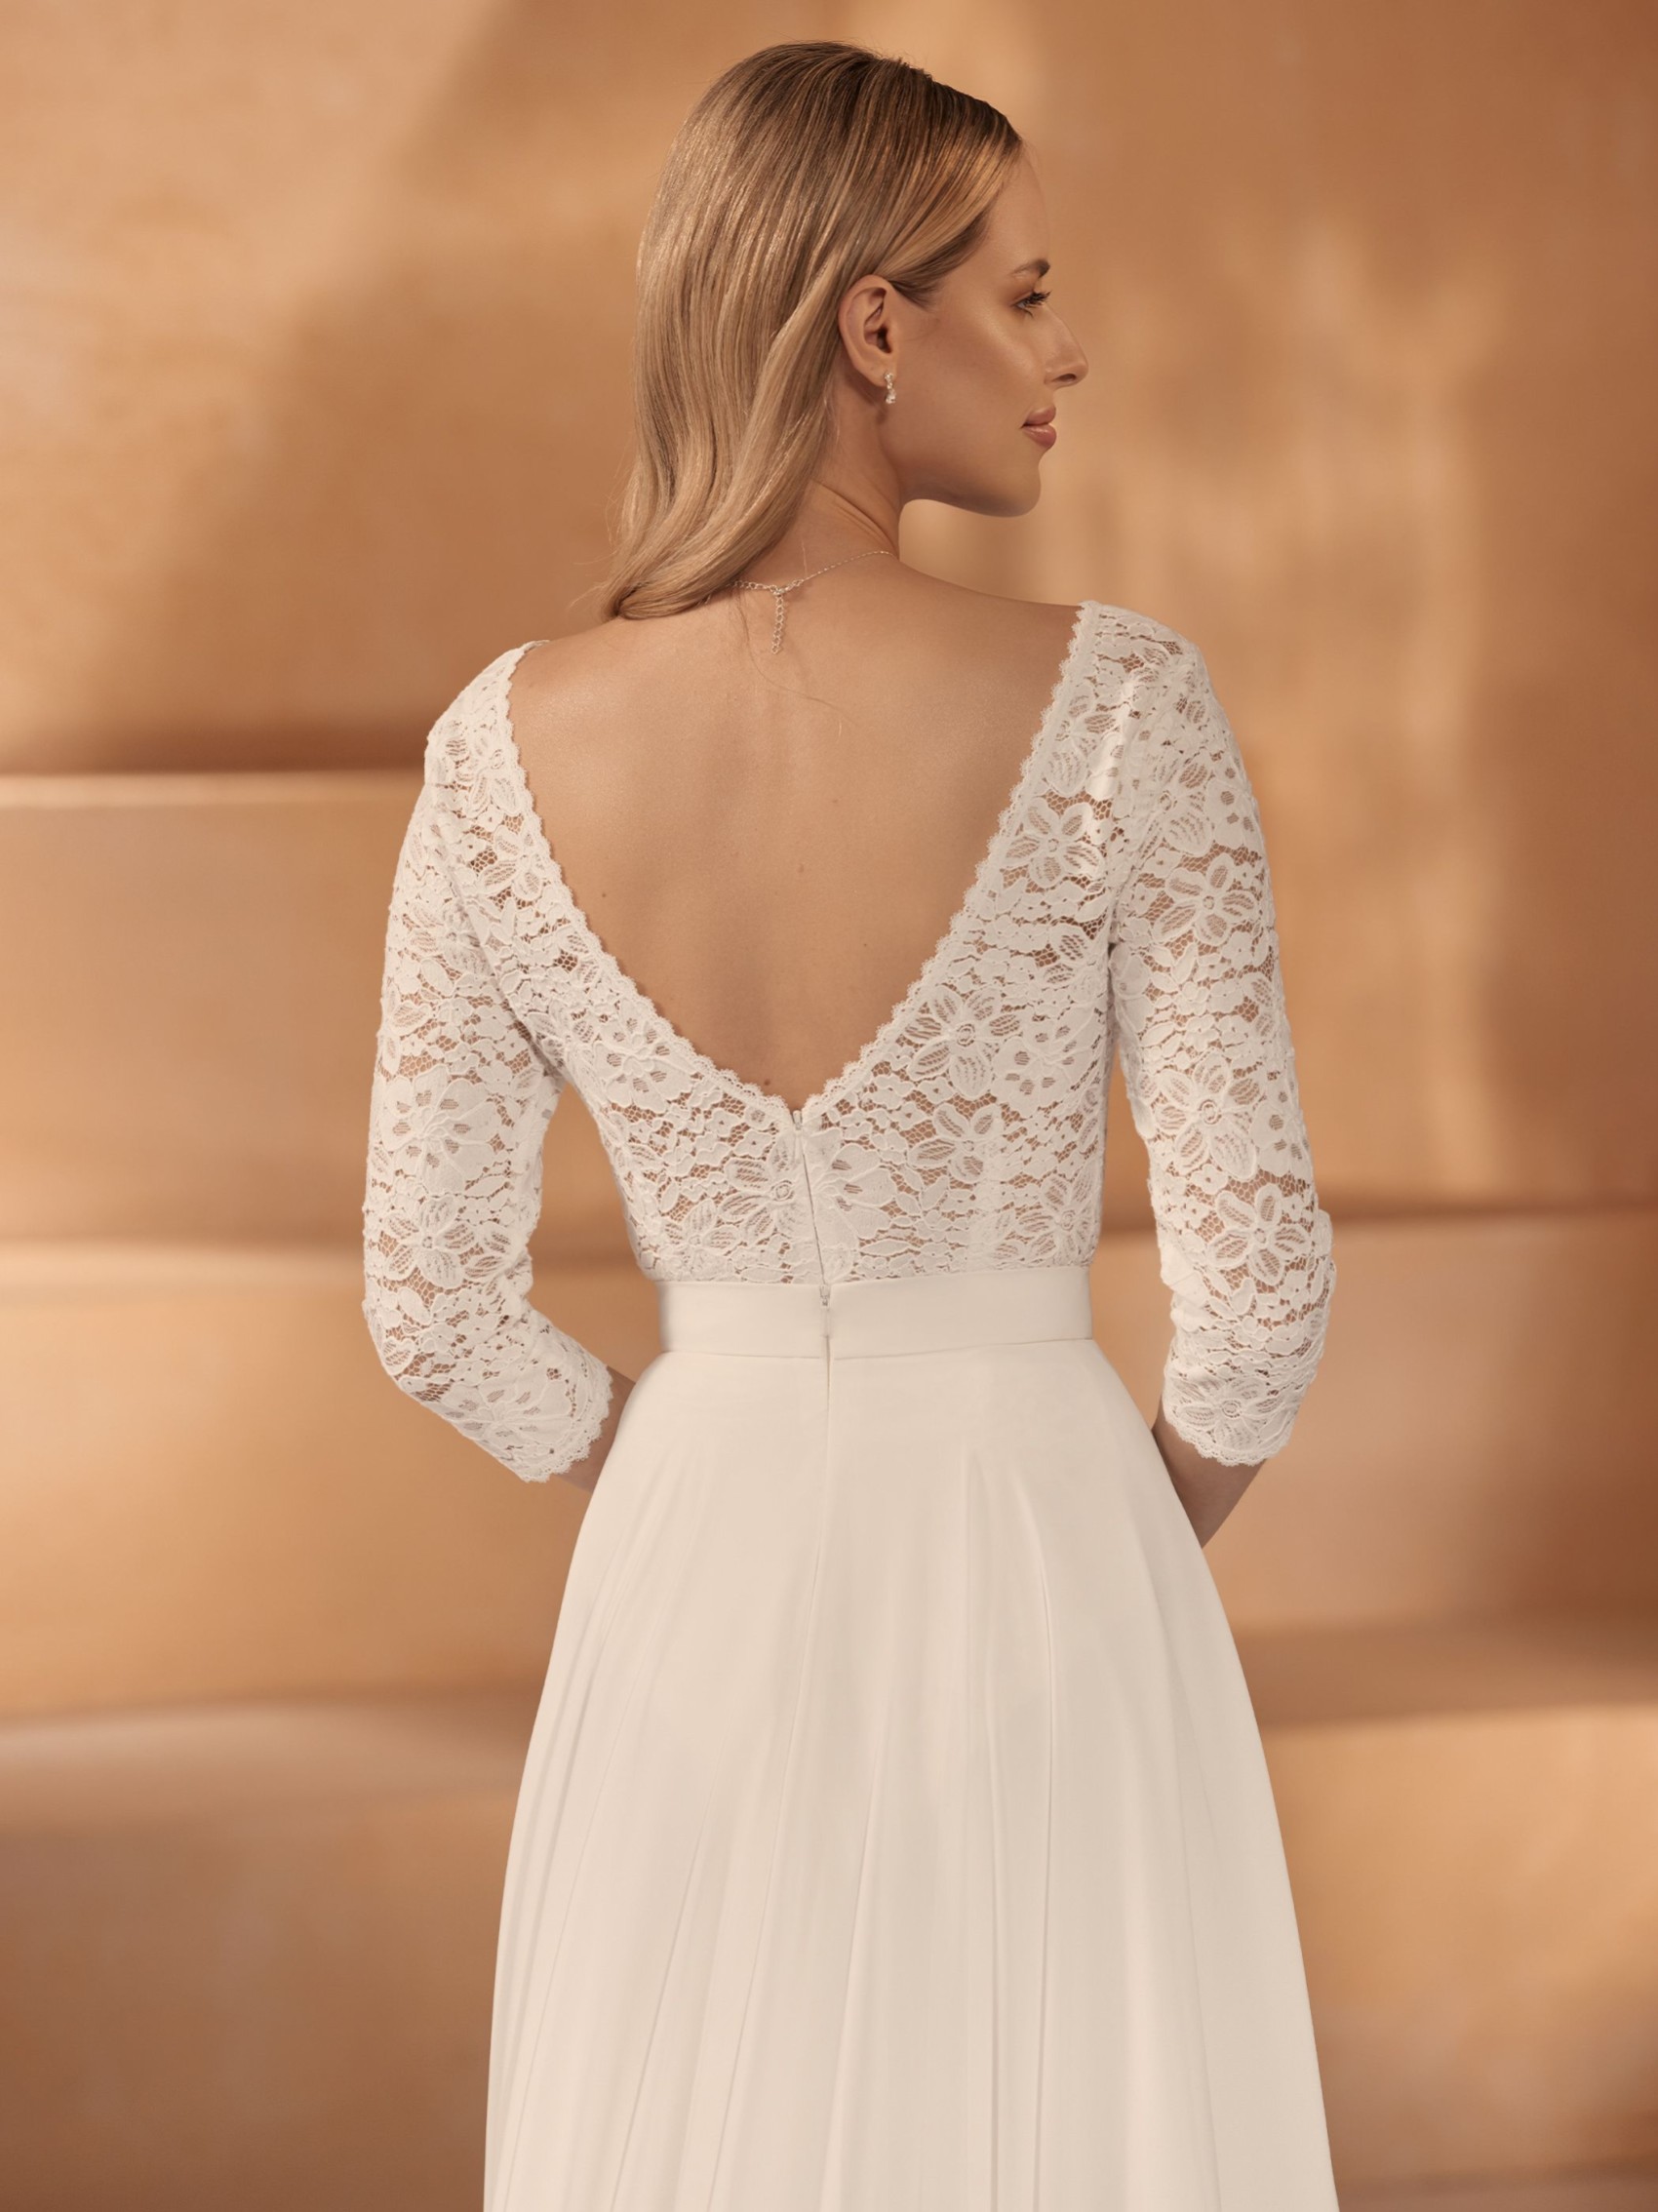 Lace bridal bodysuit with long sleeves and low back combined with